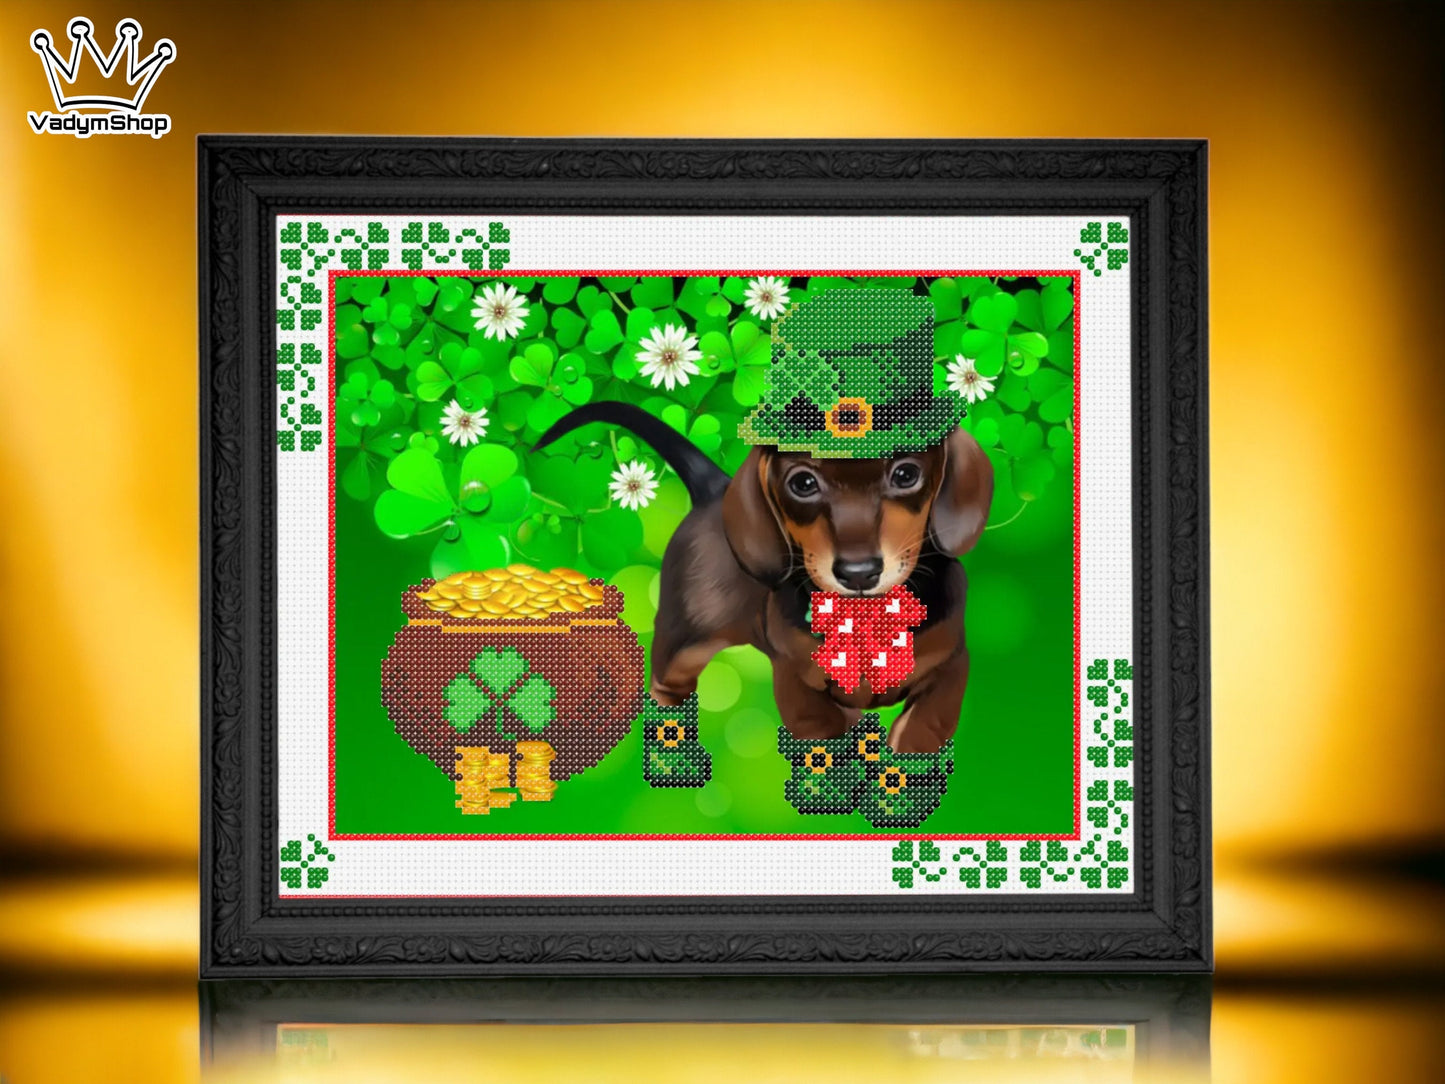 Bead embroidery kit  "Dog on wealth" - VadymShop